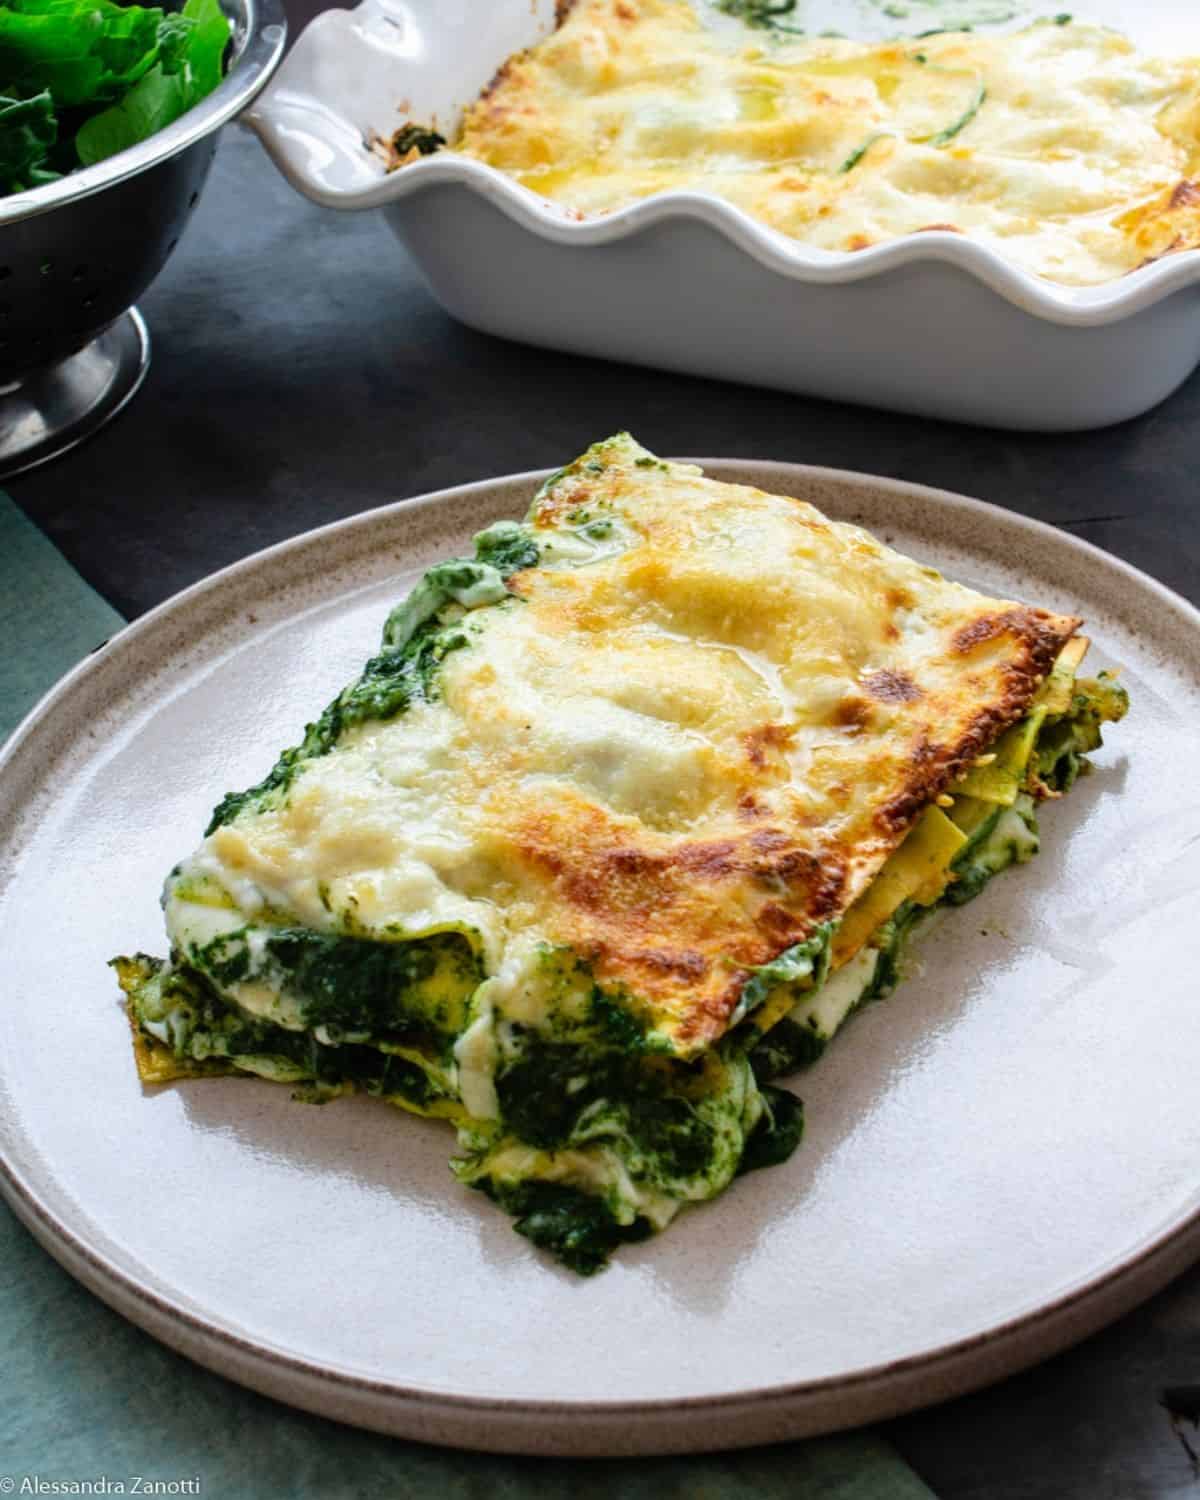 A slice Spinach Lasagna showing all the layers with Mozzarella and Spinach